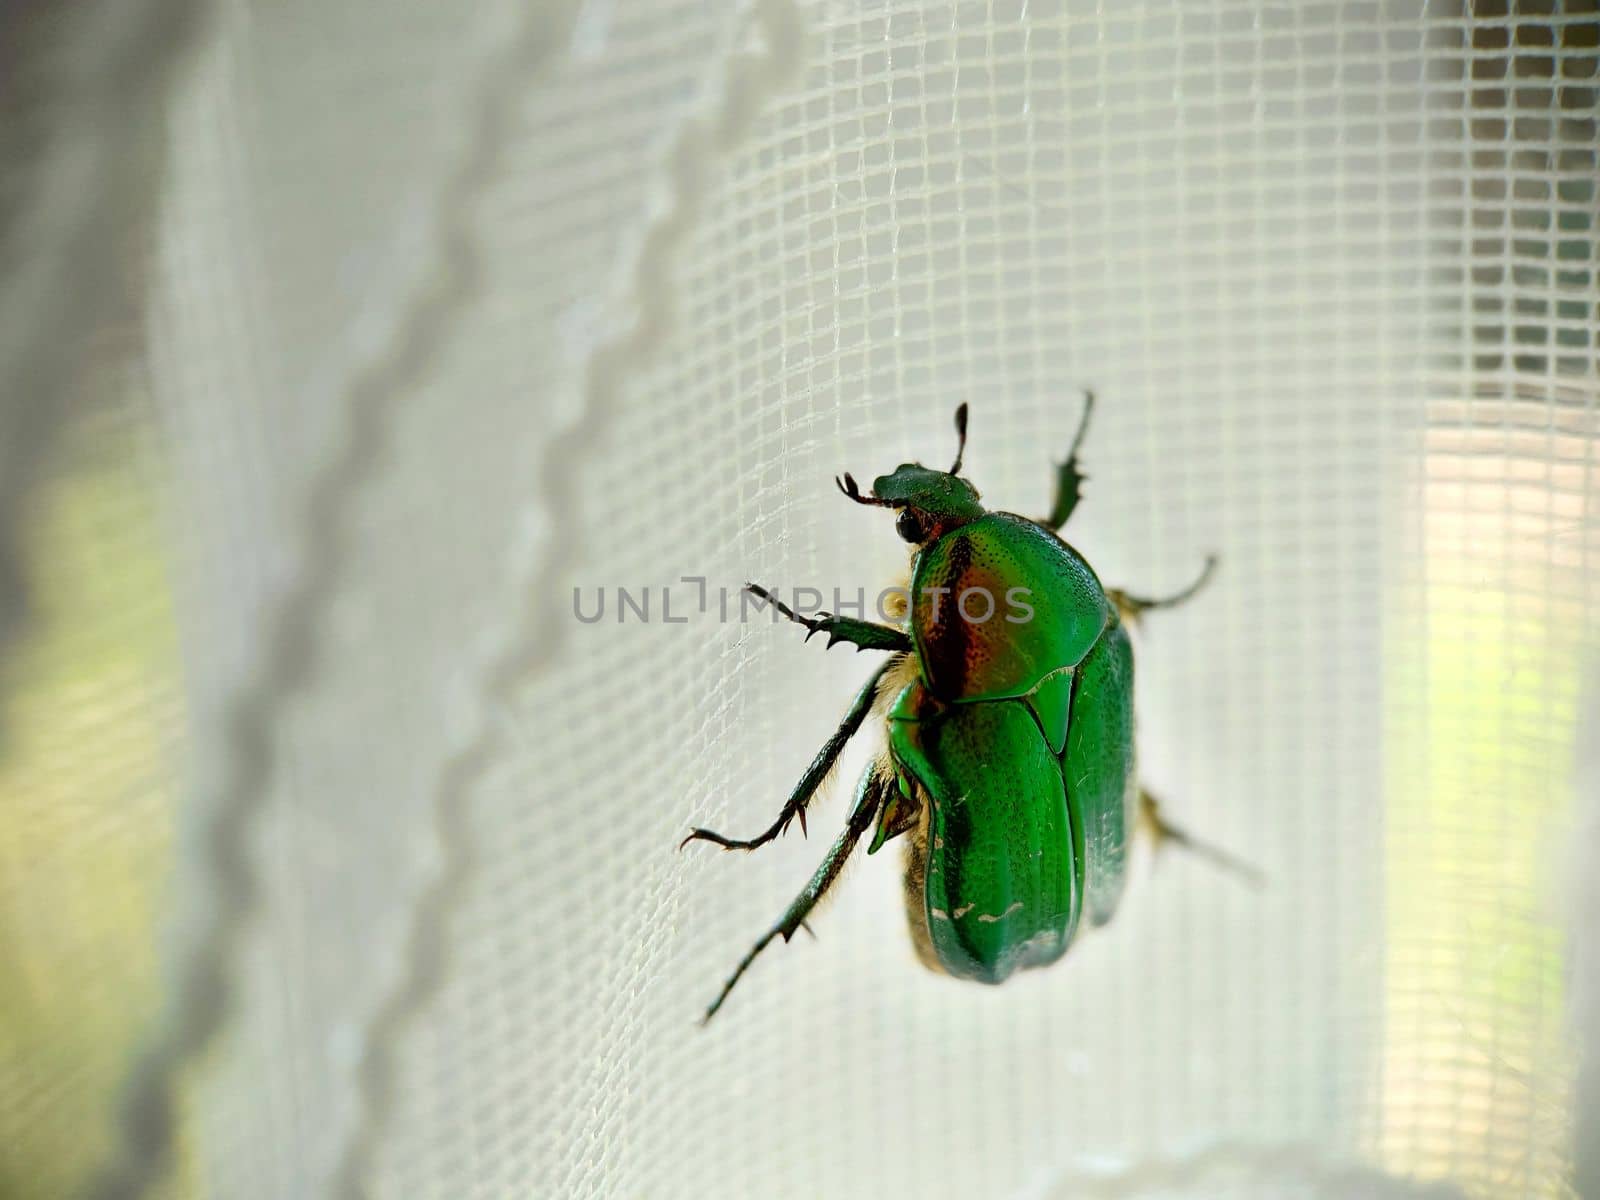 A large green beetle crawls up the lacy white curtains close-up